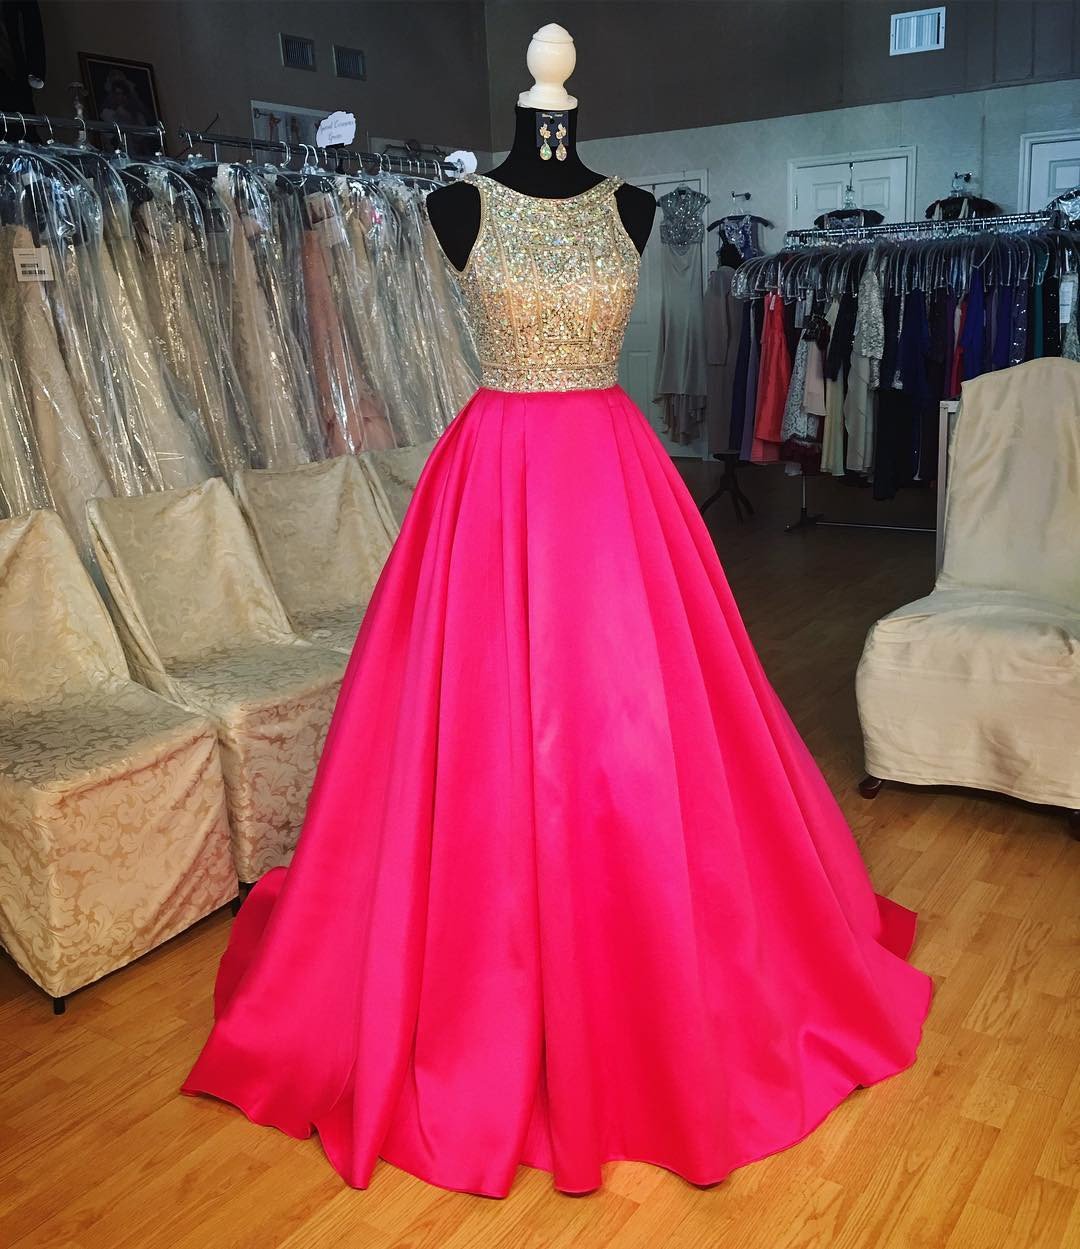 Pink Satin Ball Gowns Prom Dresses Crystal Beaded 2017 Luxury Evening Gowns